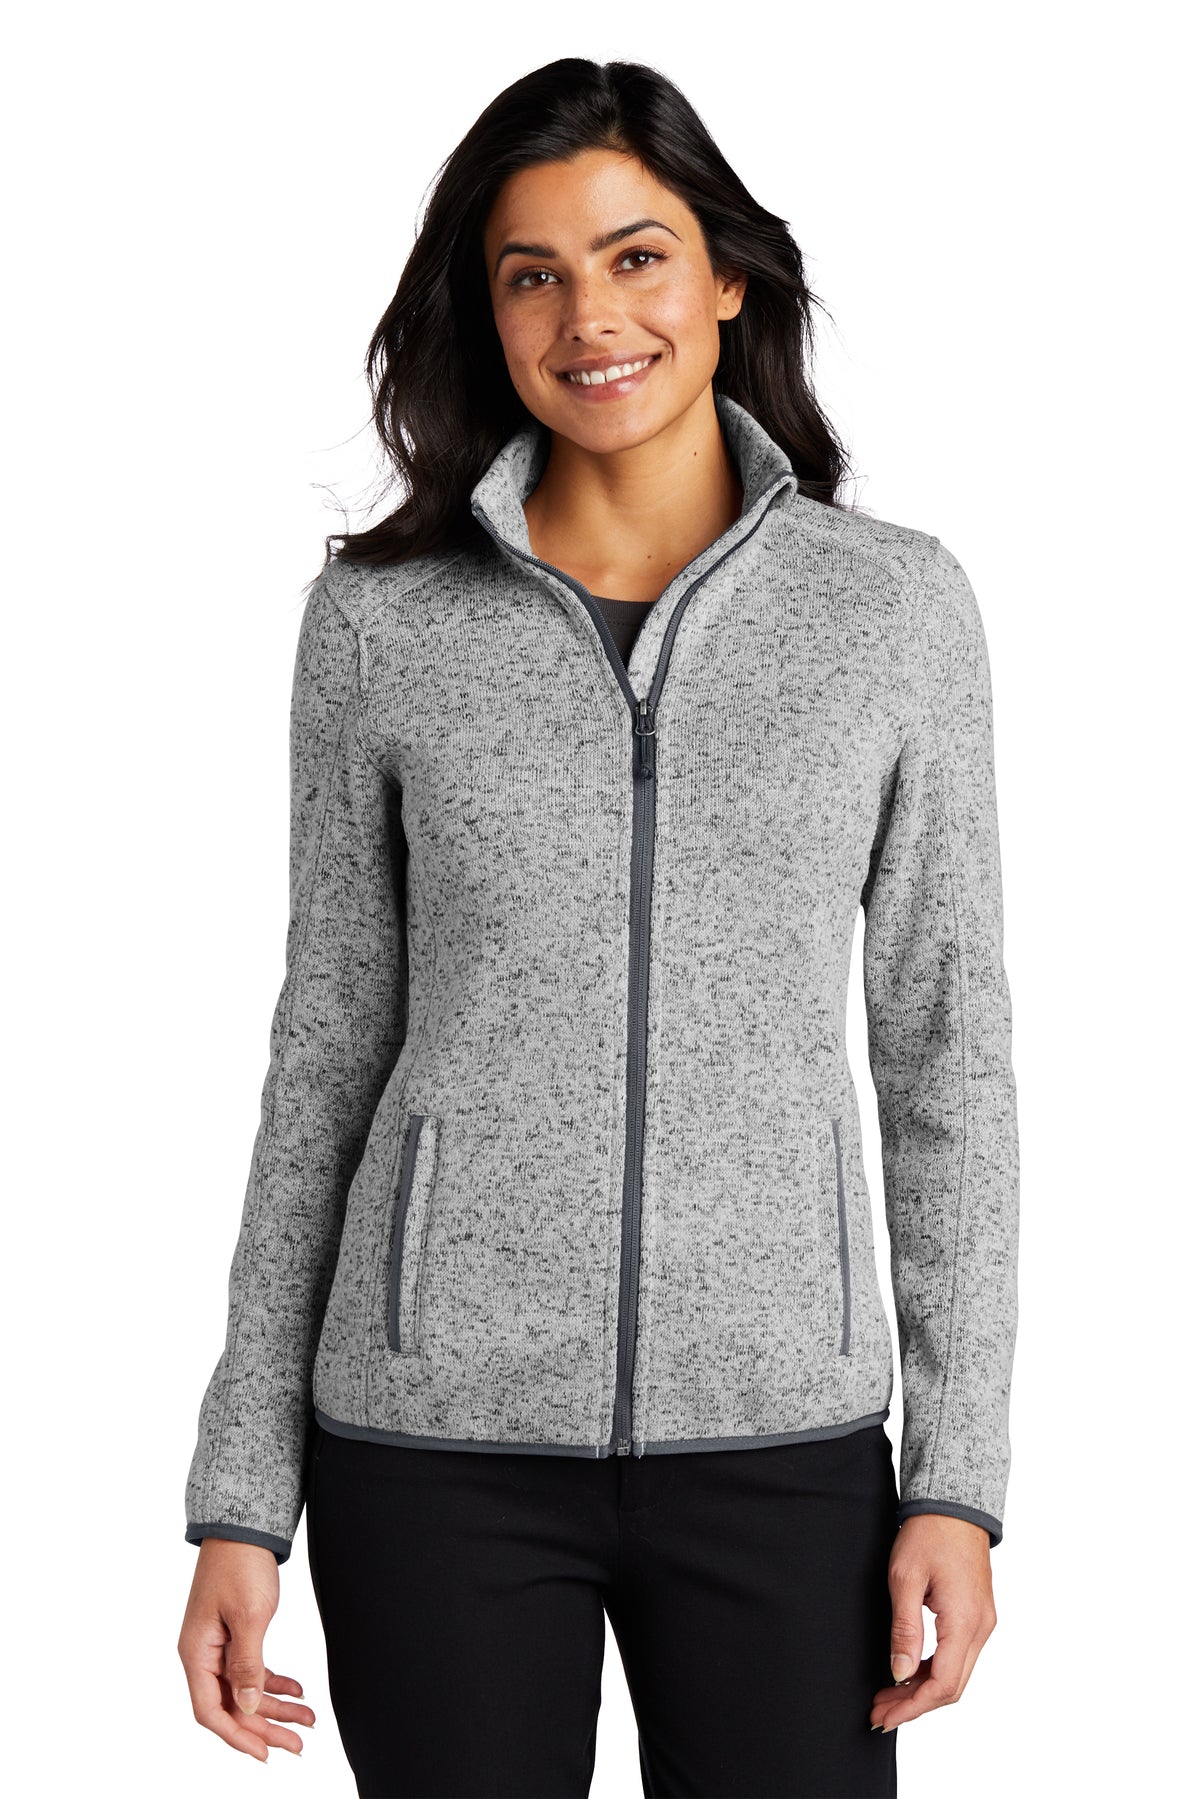 Ladies Port Authority Sweater Fleece Jacket - Rock Canyon Football -  Educational Outfitters - Denver